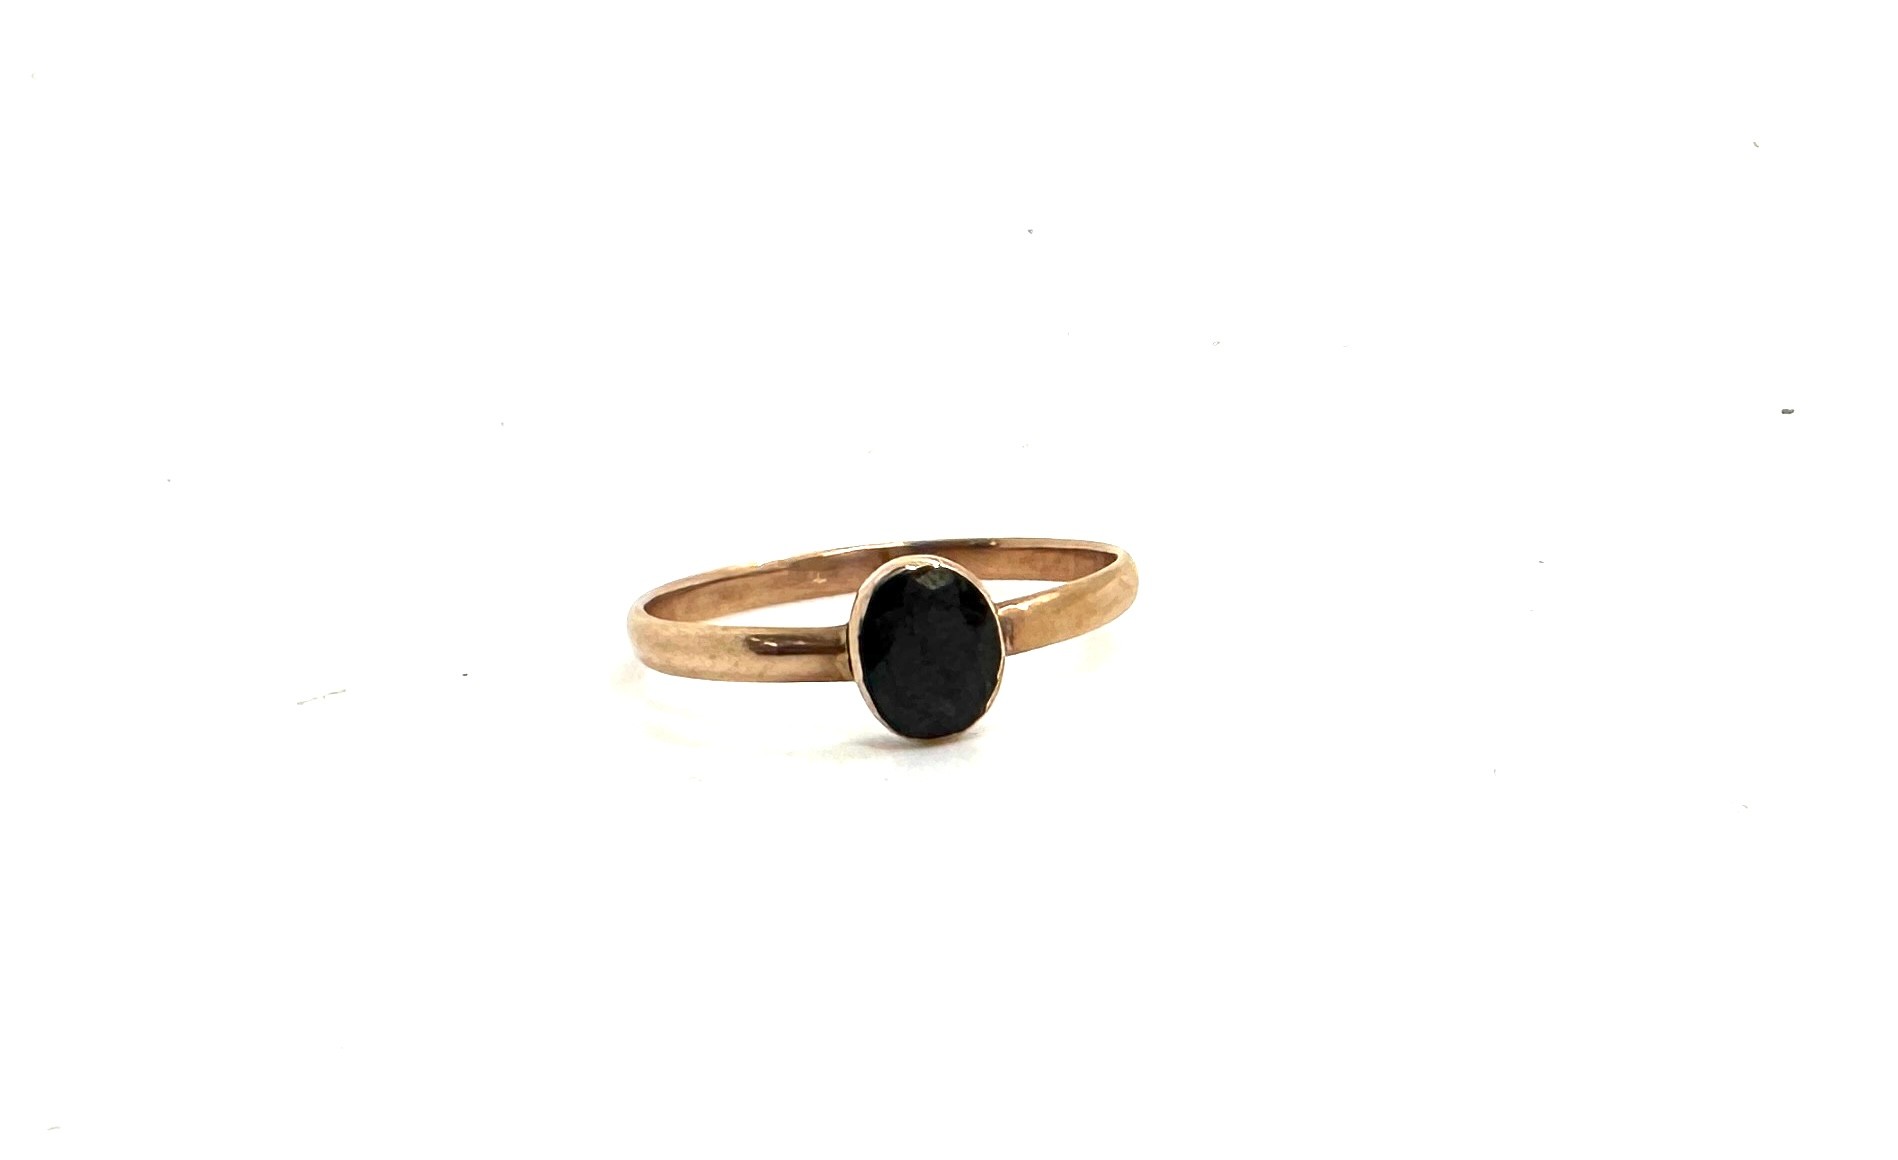 Antique unmarked gold Georgian flat cut almandine garnet ring overall good condition UK size R 1.6 - Image 4 of 4